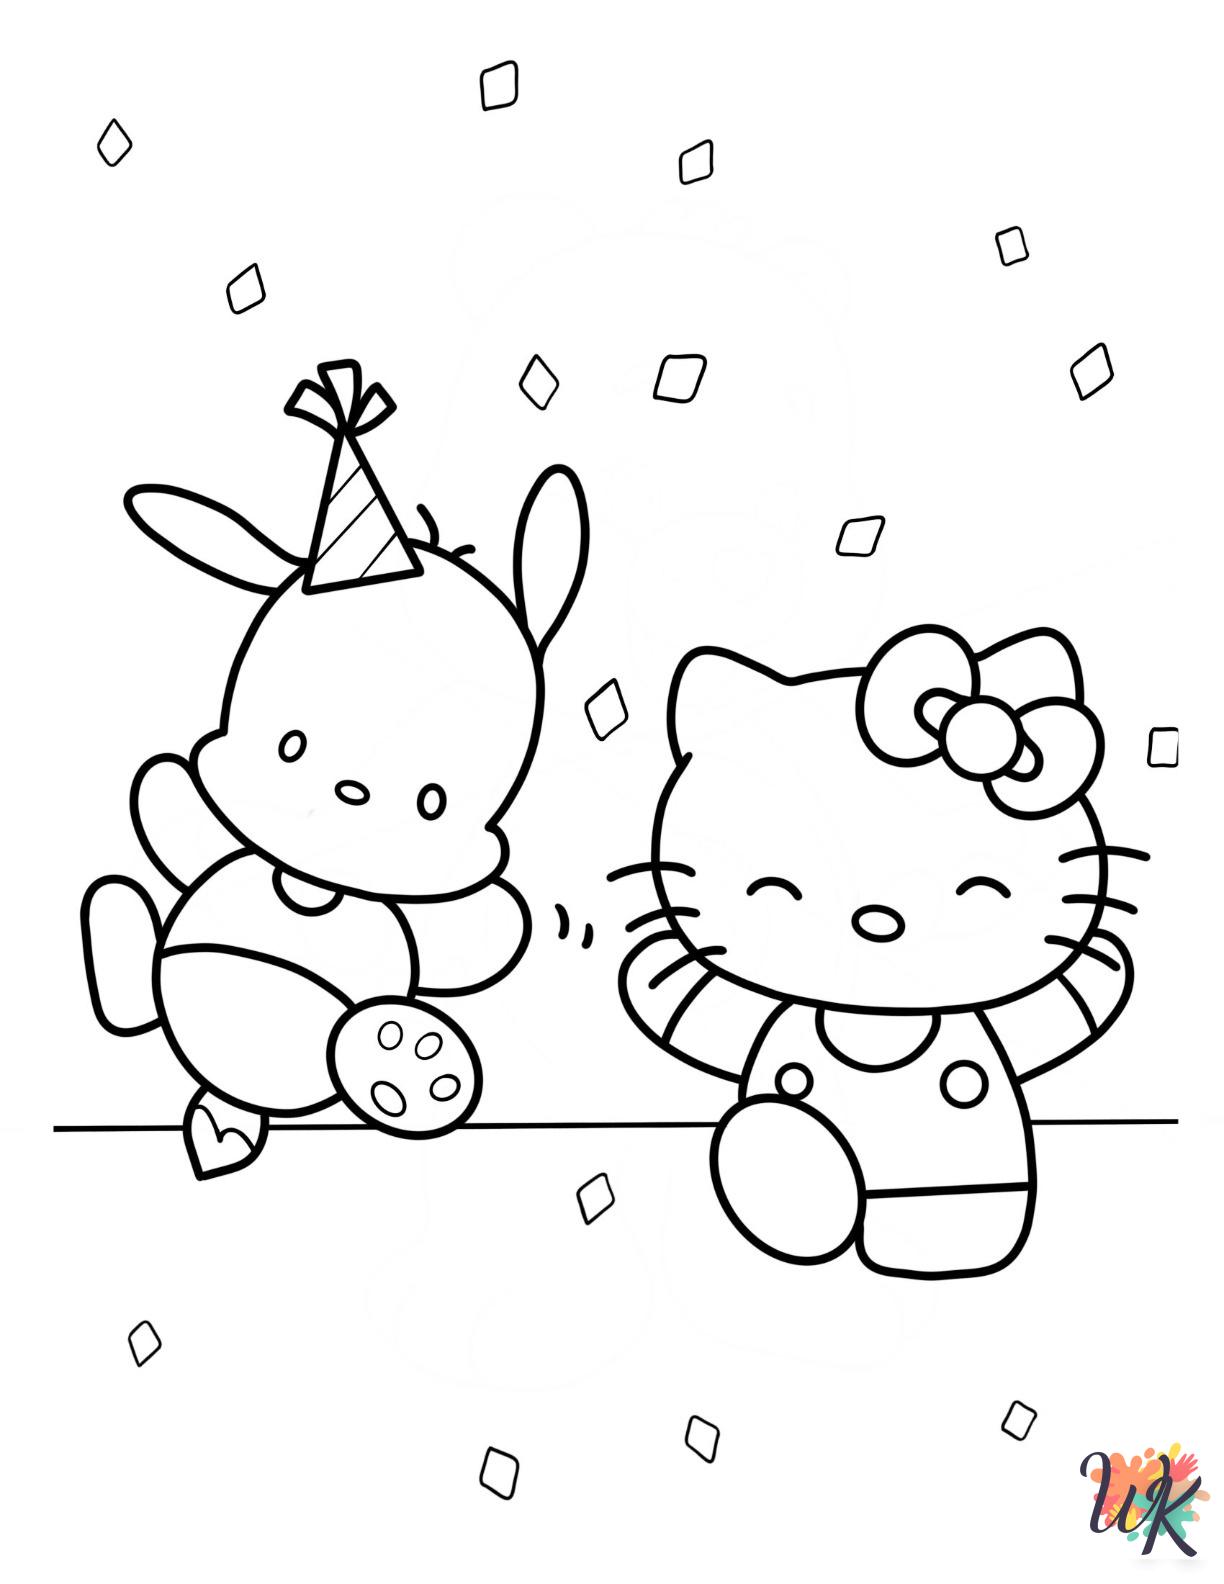 old-fashioned Pochacco coloring pages